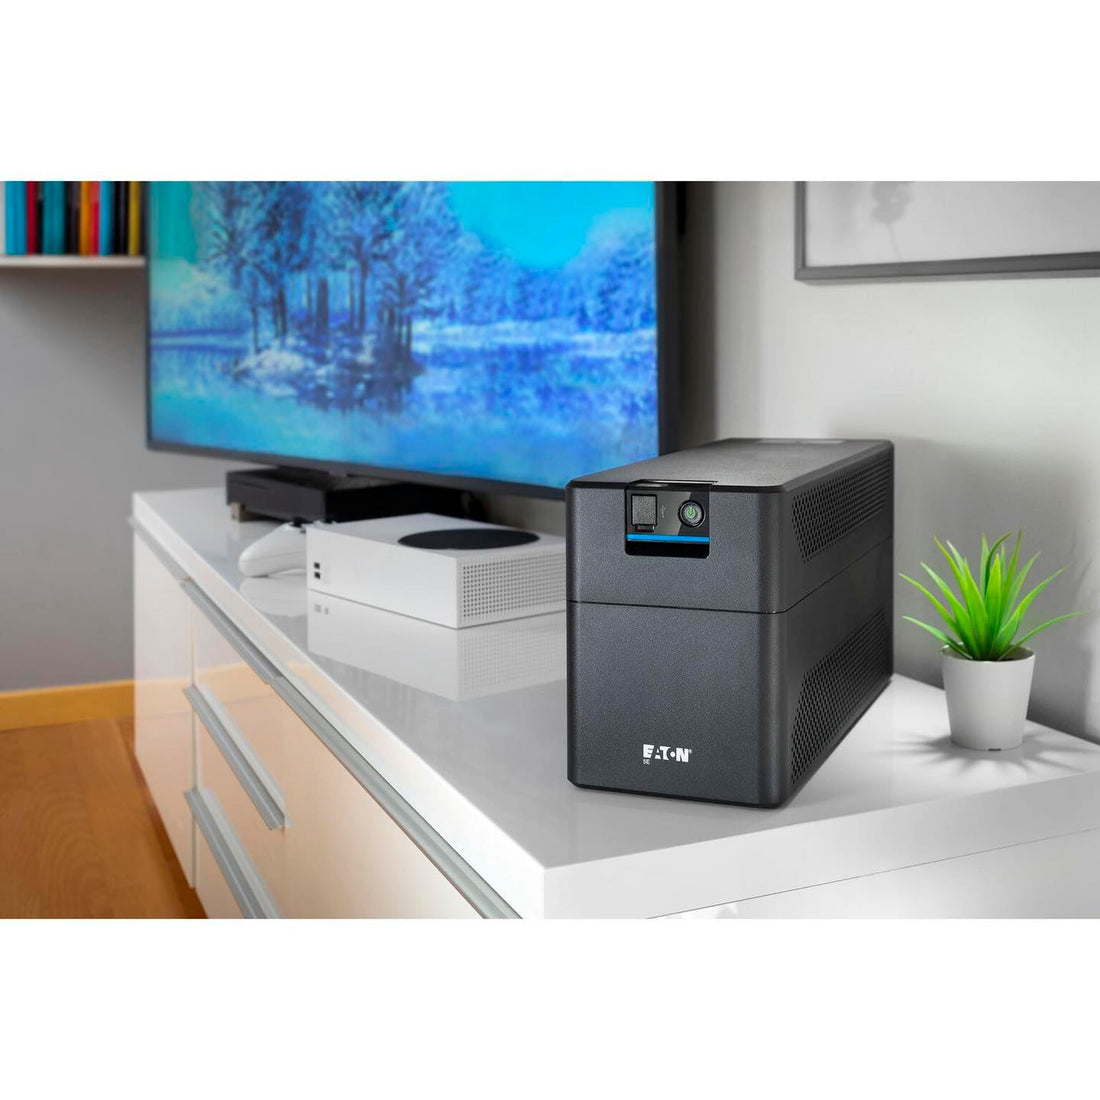 Eaton 5E Gen2 UPS: Affordable Protection for Your Valuable Electronics